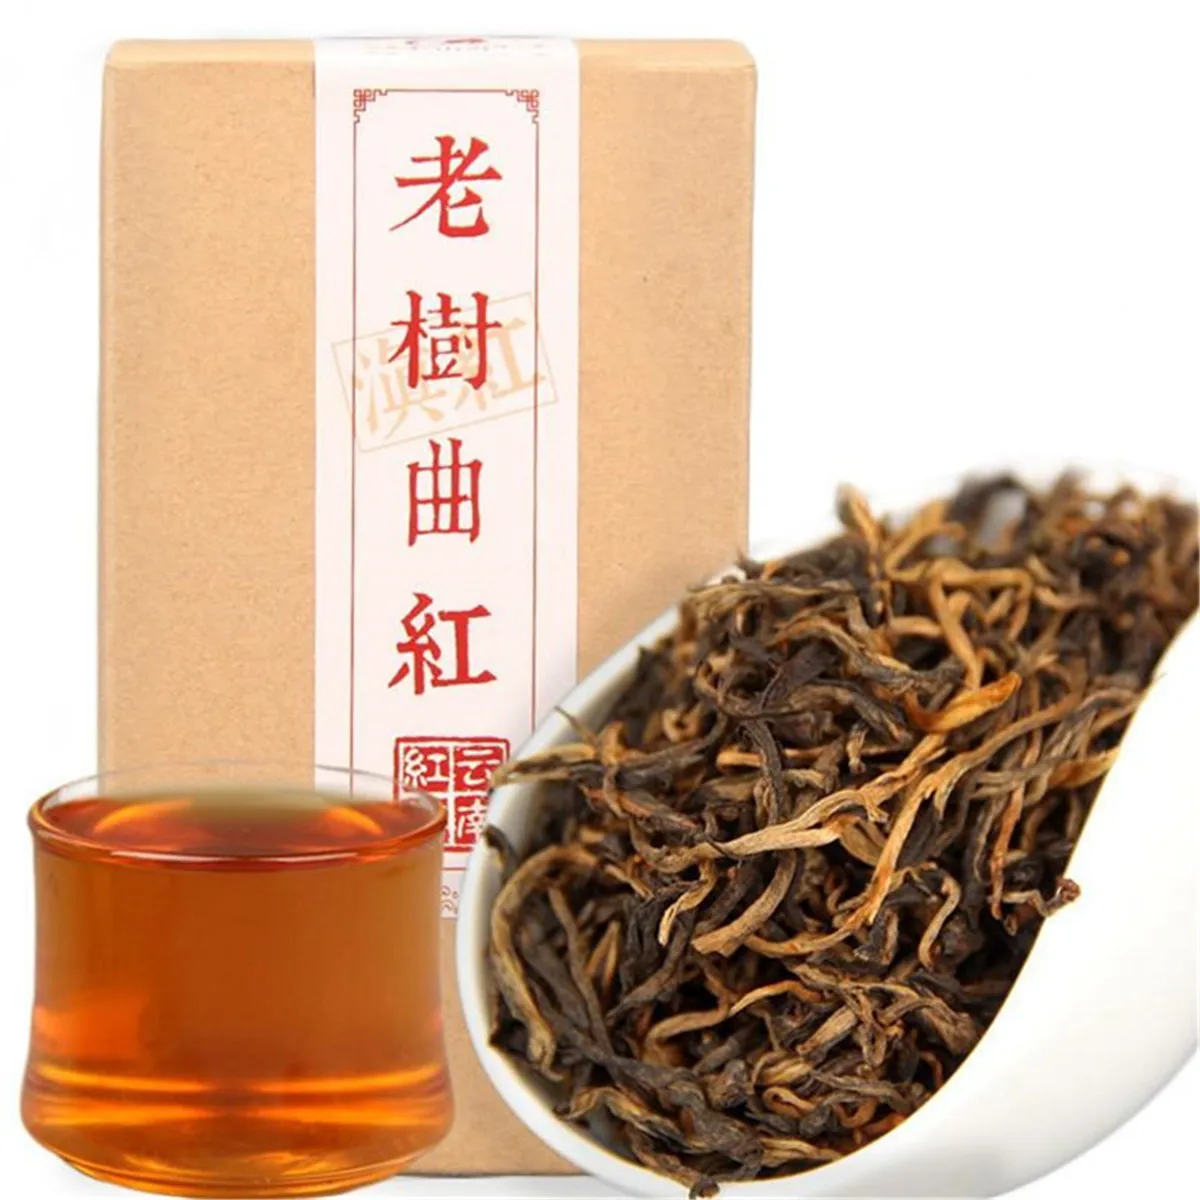 

China Yunnan dian Hong Black Tea Chinese Gifts Box Tea Spring feng Qing Fragrant Flavor Golden Bough of Pine Needle red Tea